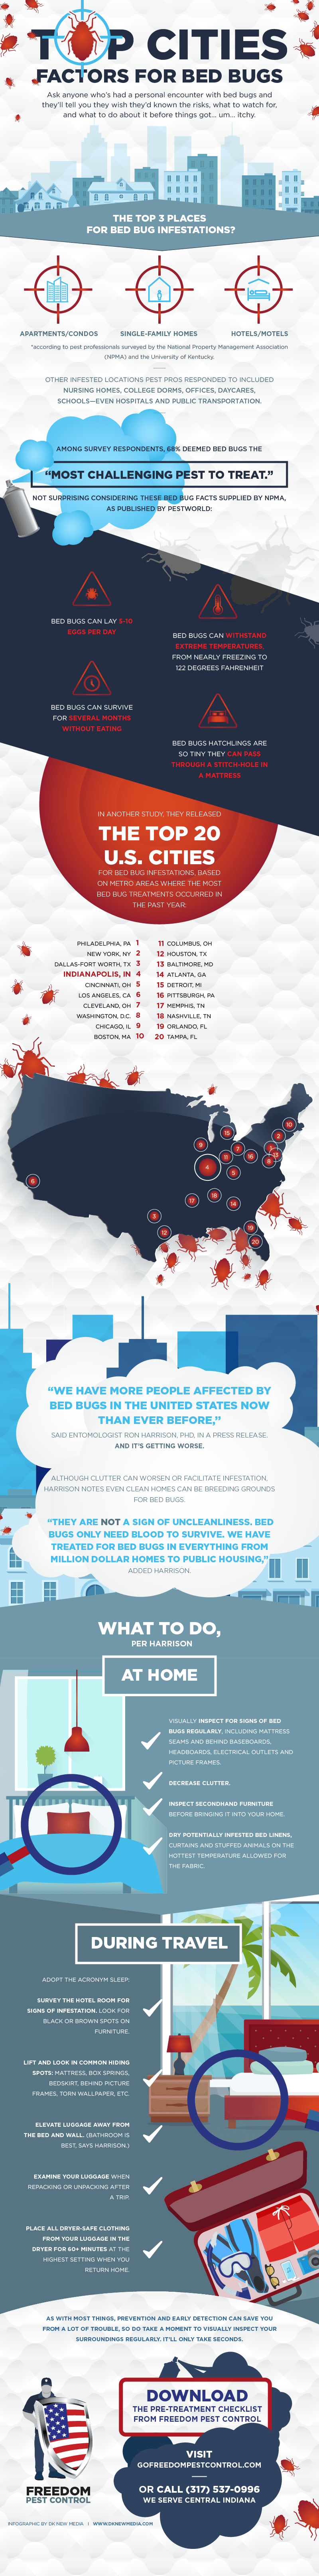 2019 Indianapolis is a Top City for Bed Bugs